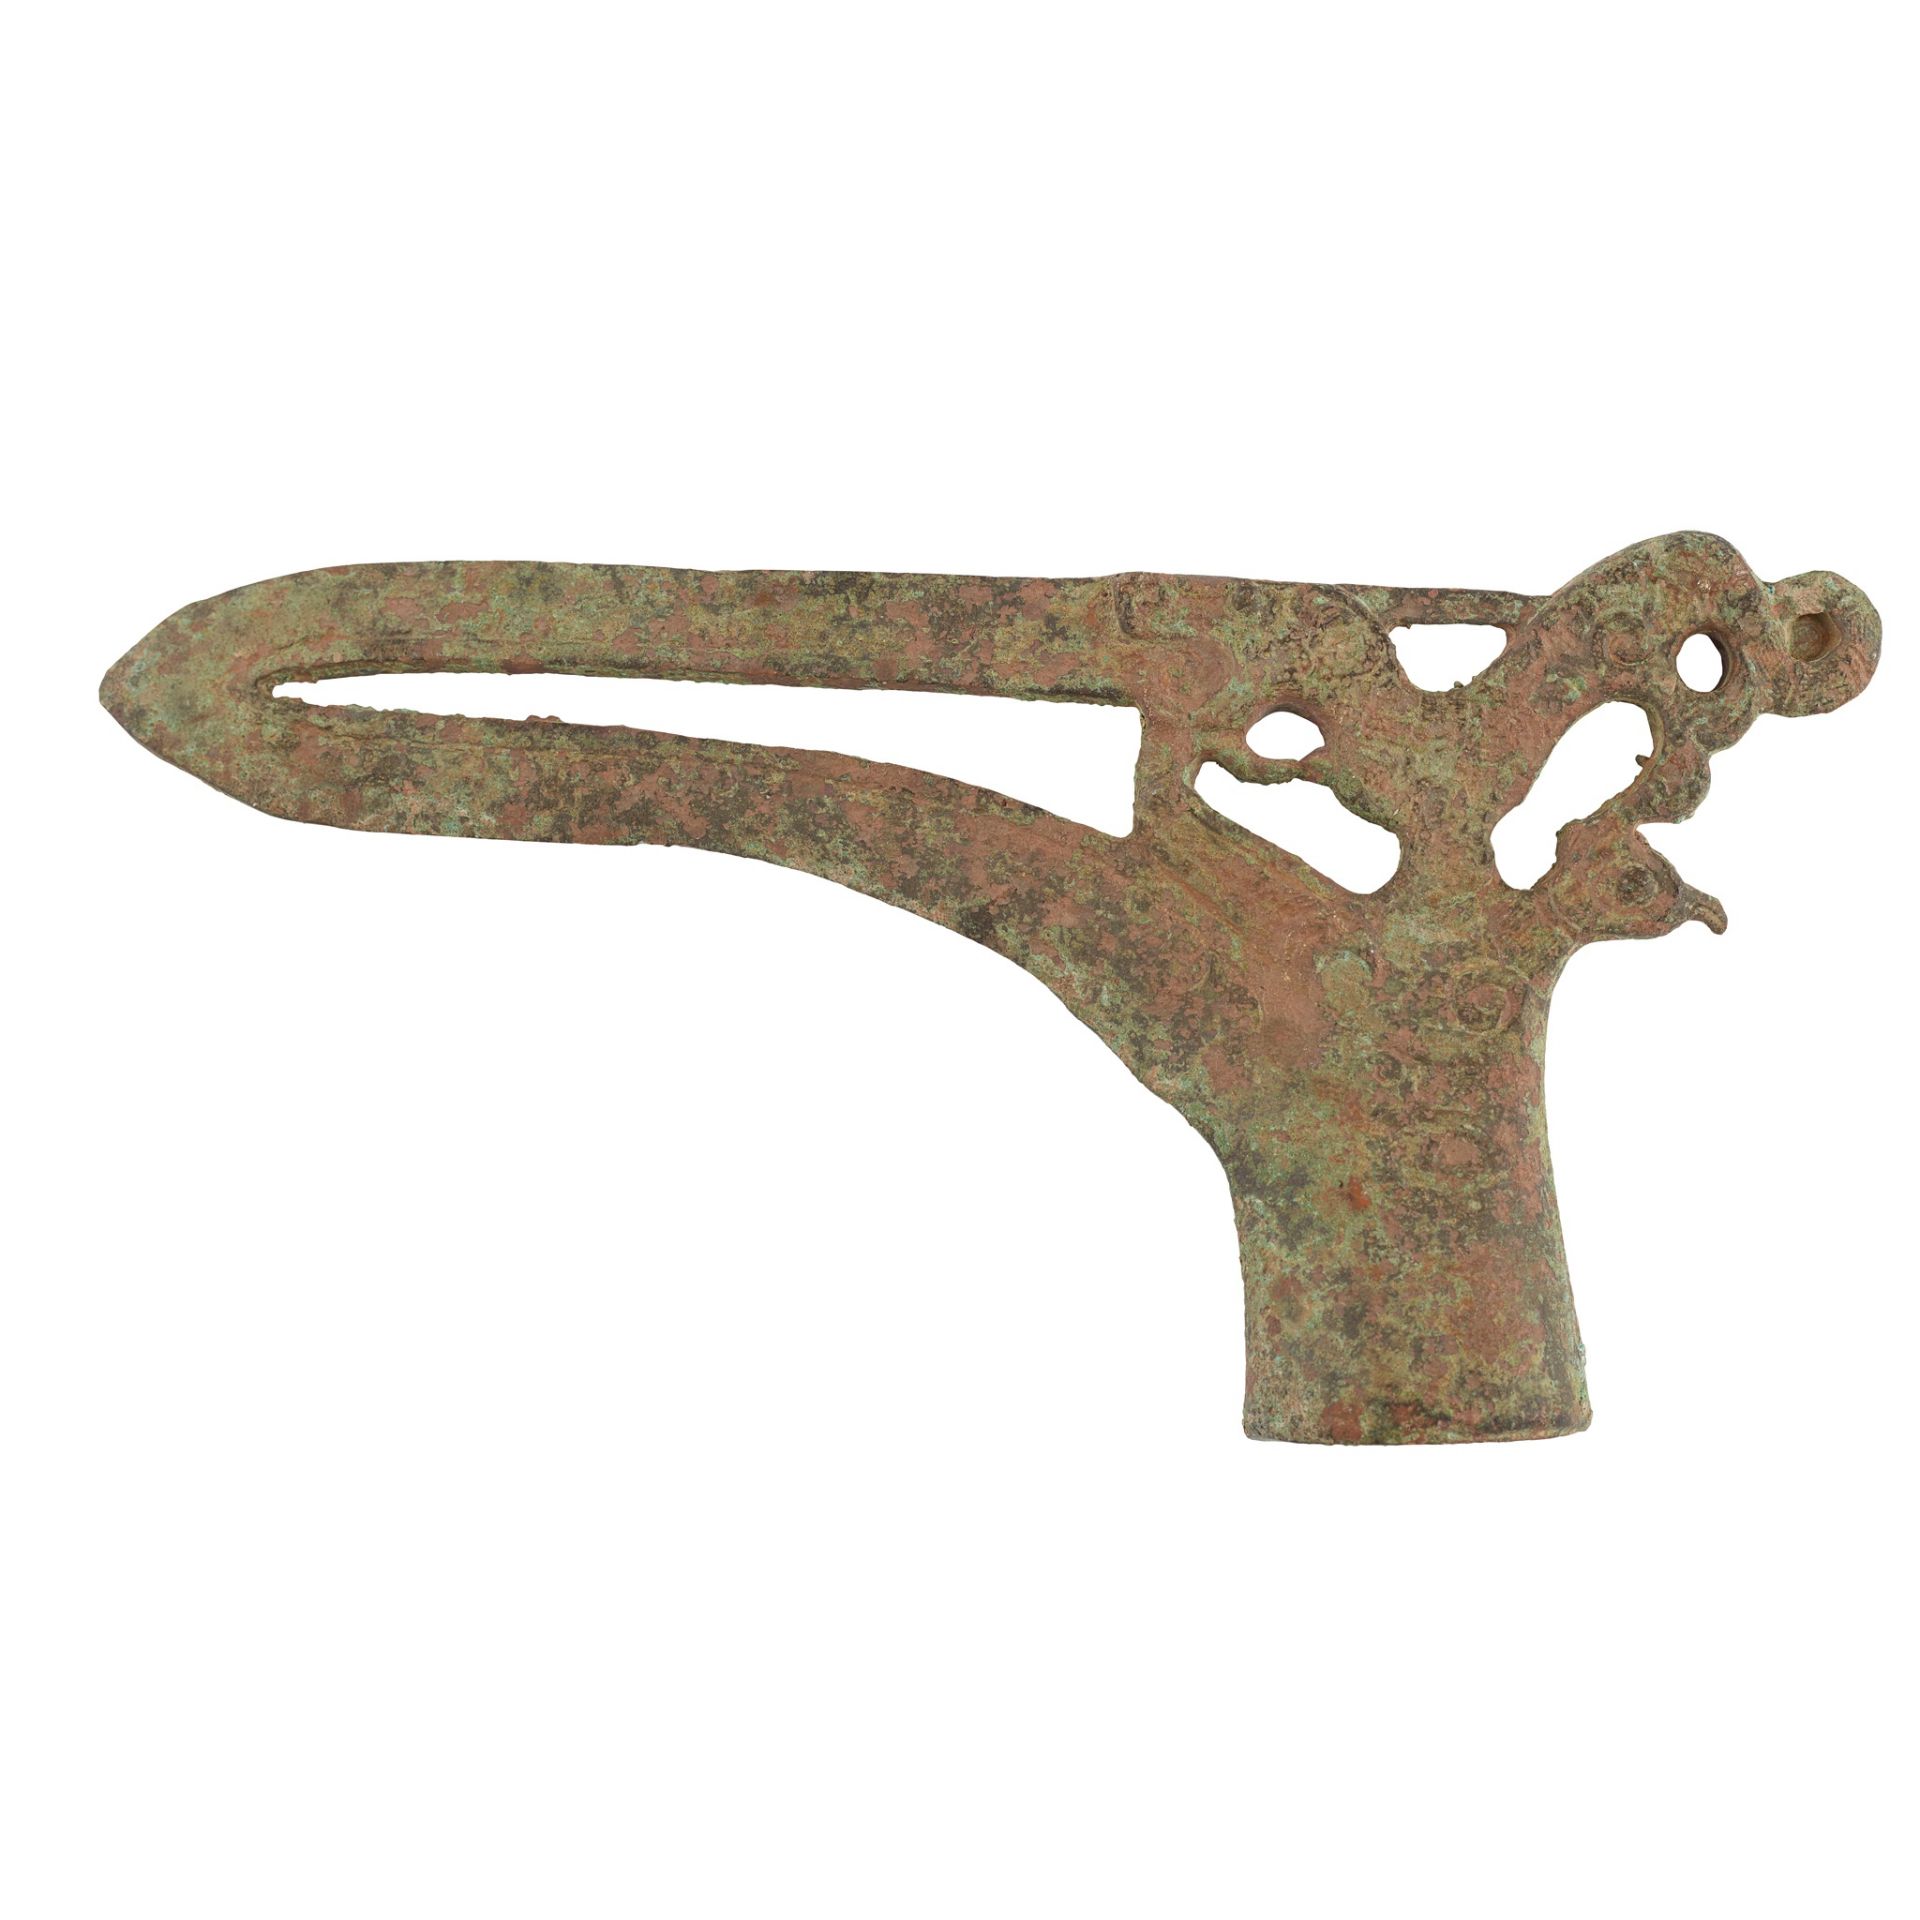 ARCHAIC STYLE BRONZE DAGGER-AXE, GE POSSIBLY EASTERN ZHOU DYNASTY, WARRING STATES PERIOD